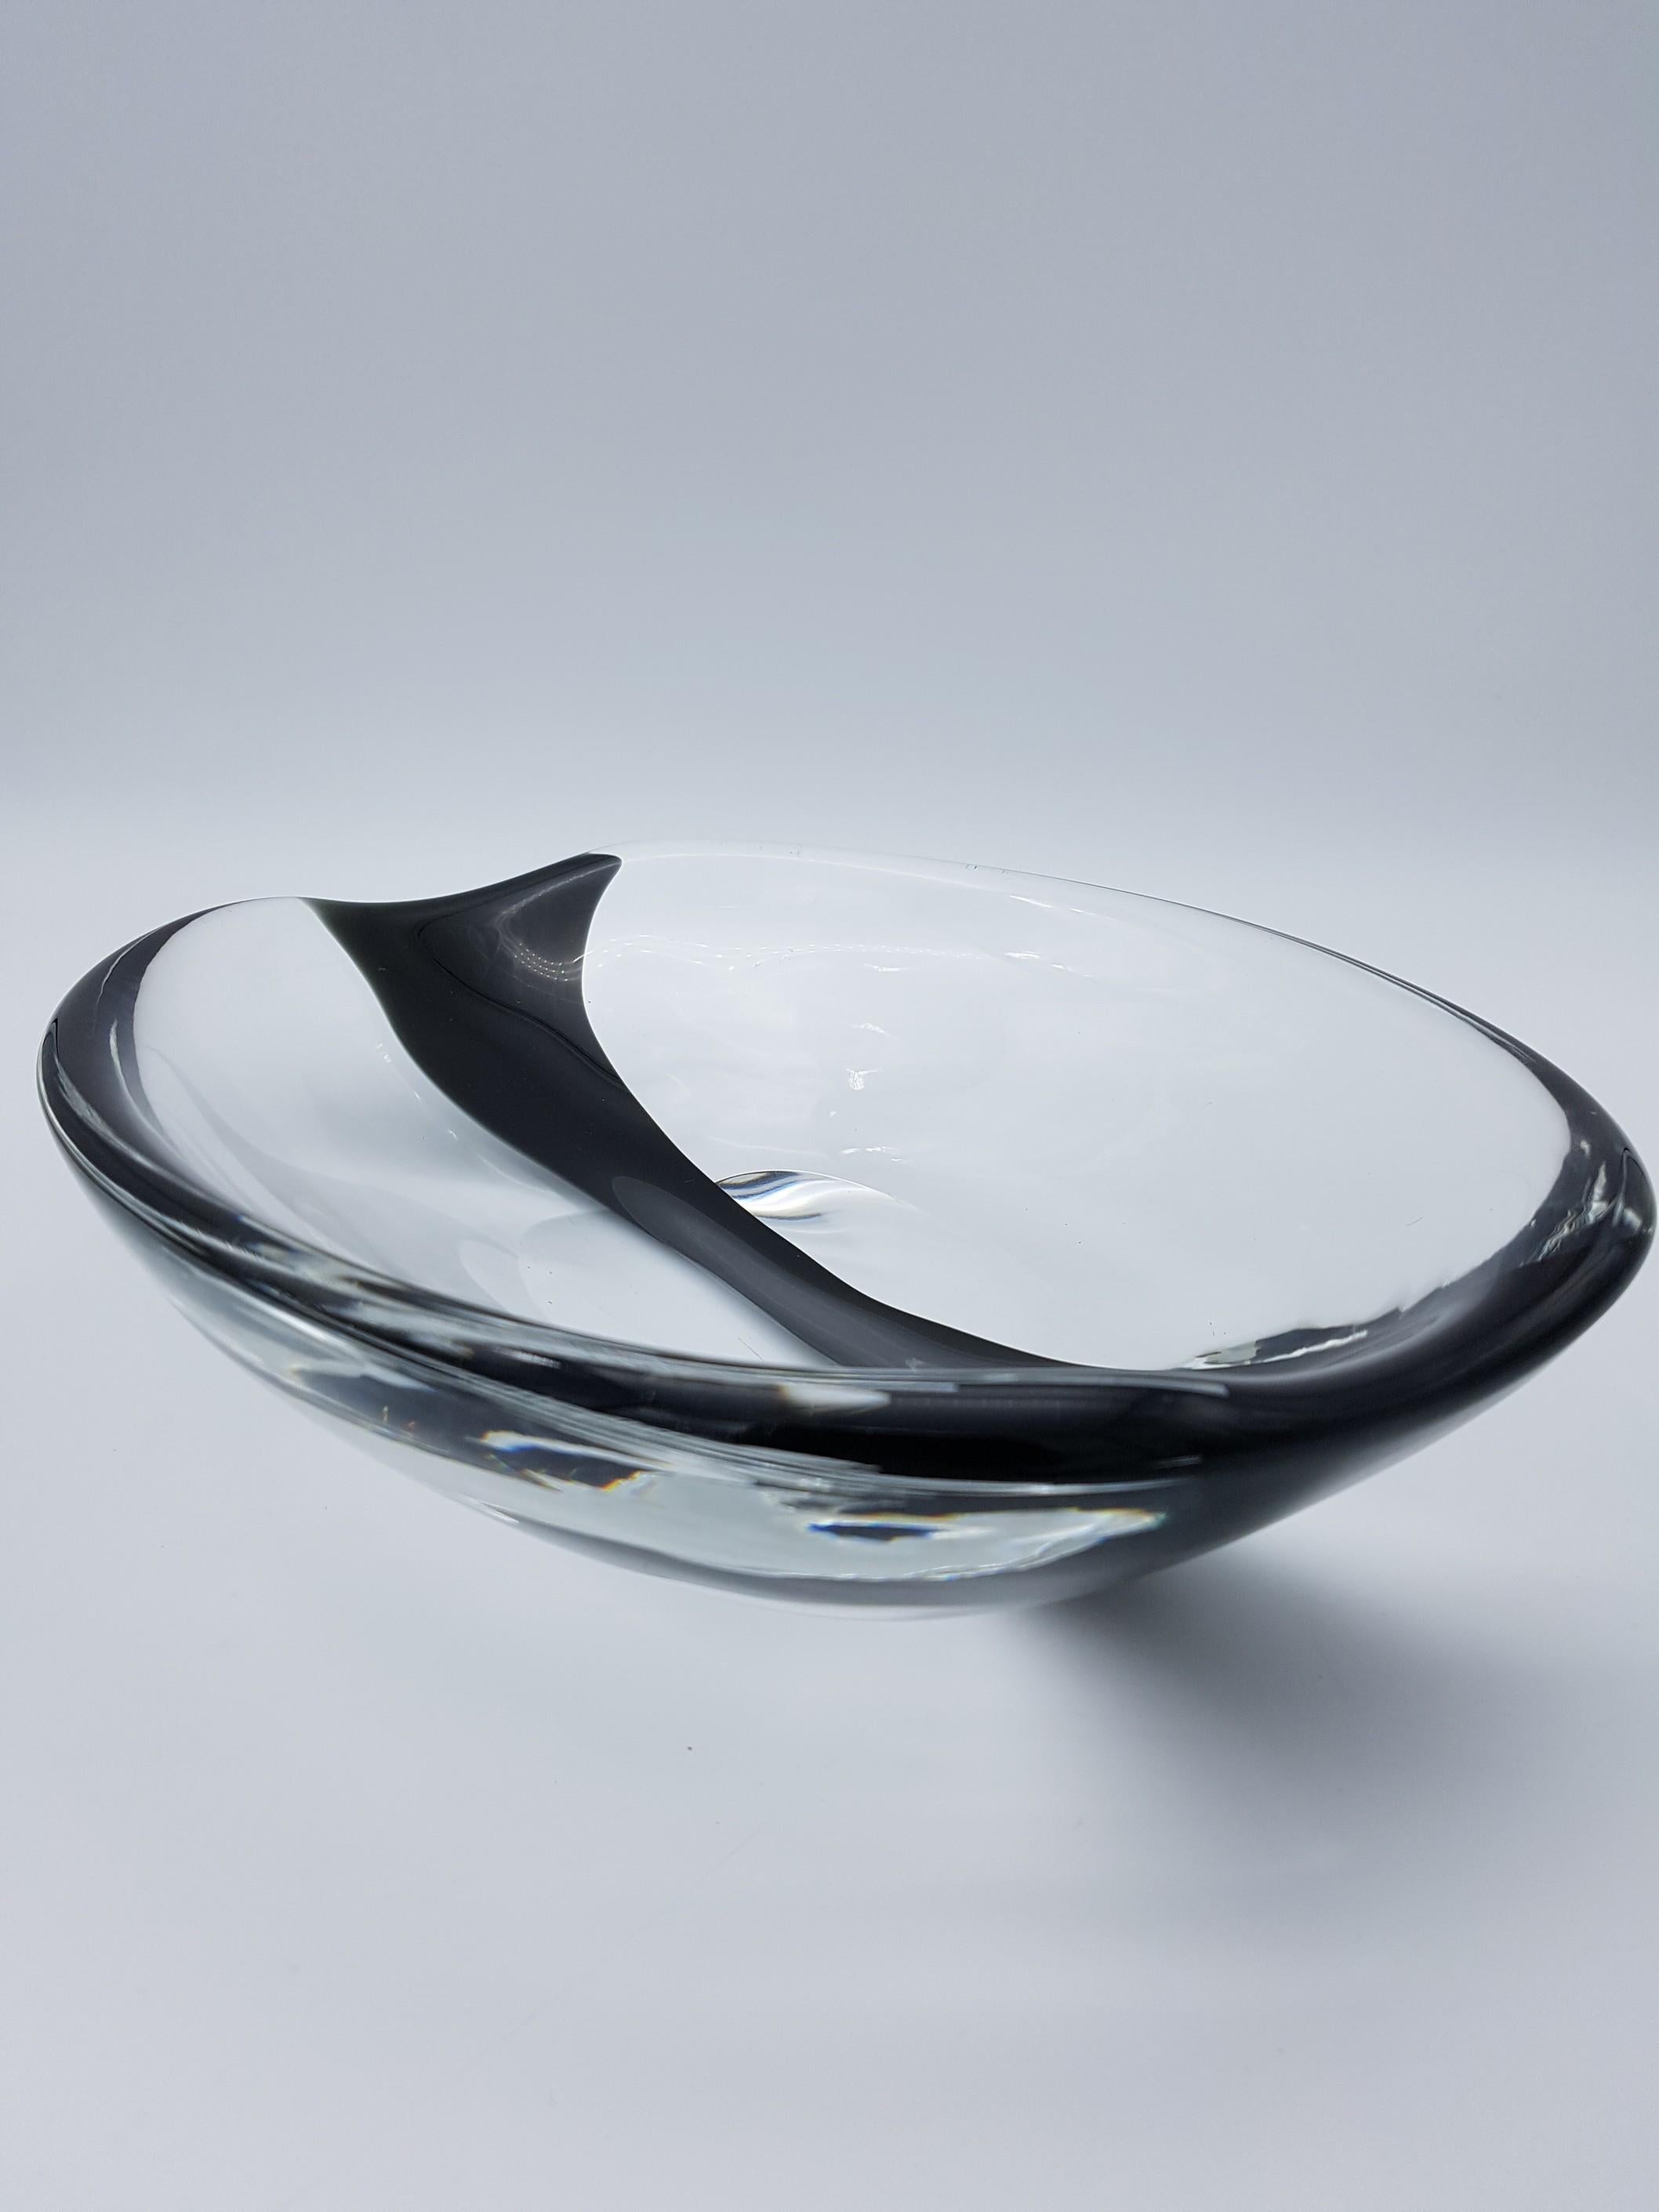 Hand-Crafted Murano Glass Centerpiece, Clear & Black by Cenedese, Design Antonio Daros, 1960s For Sale